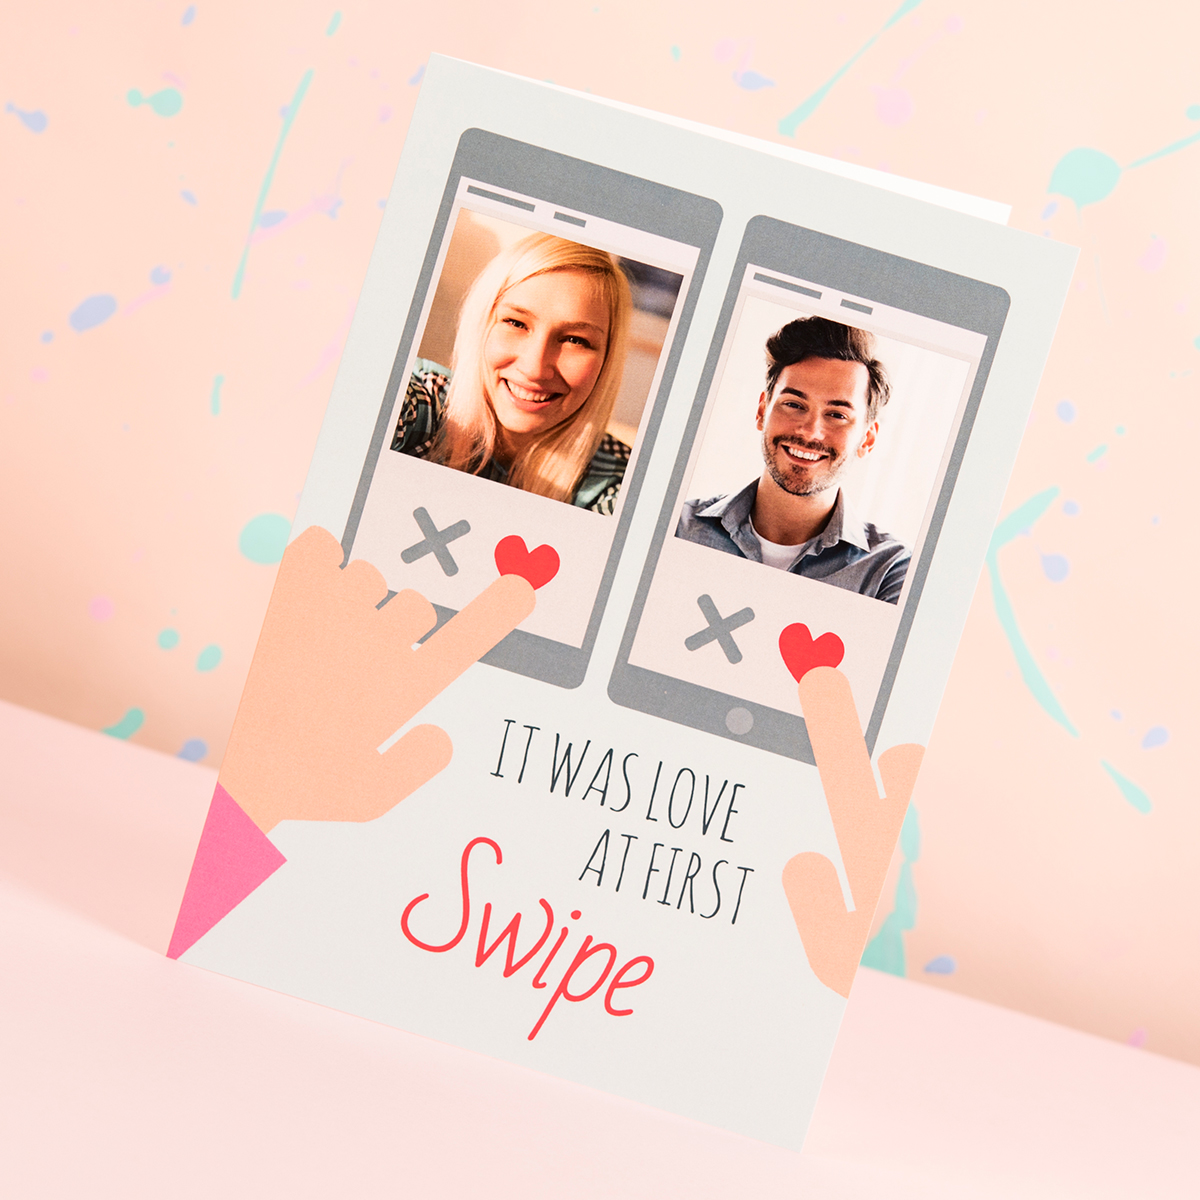 Personalised Card - Love At First Swipe